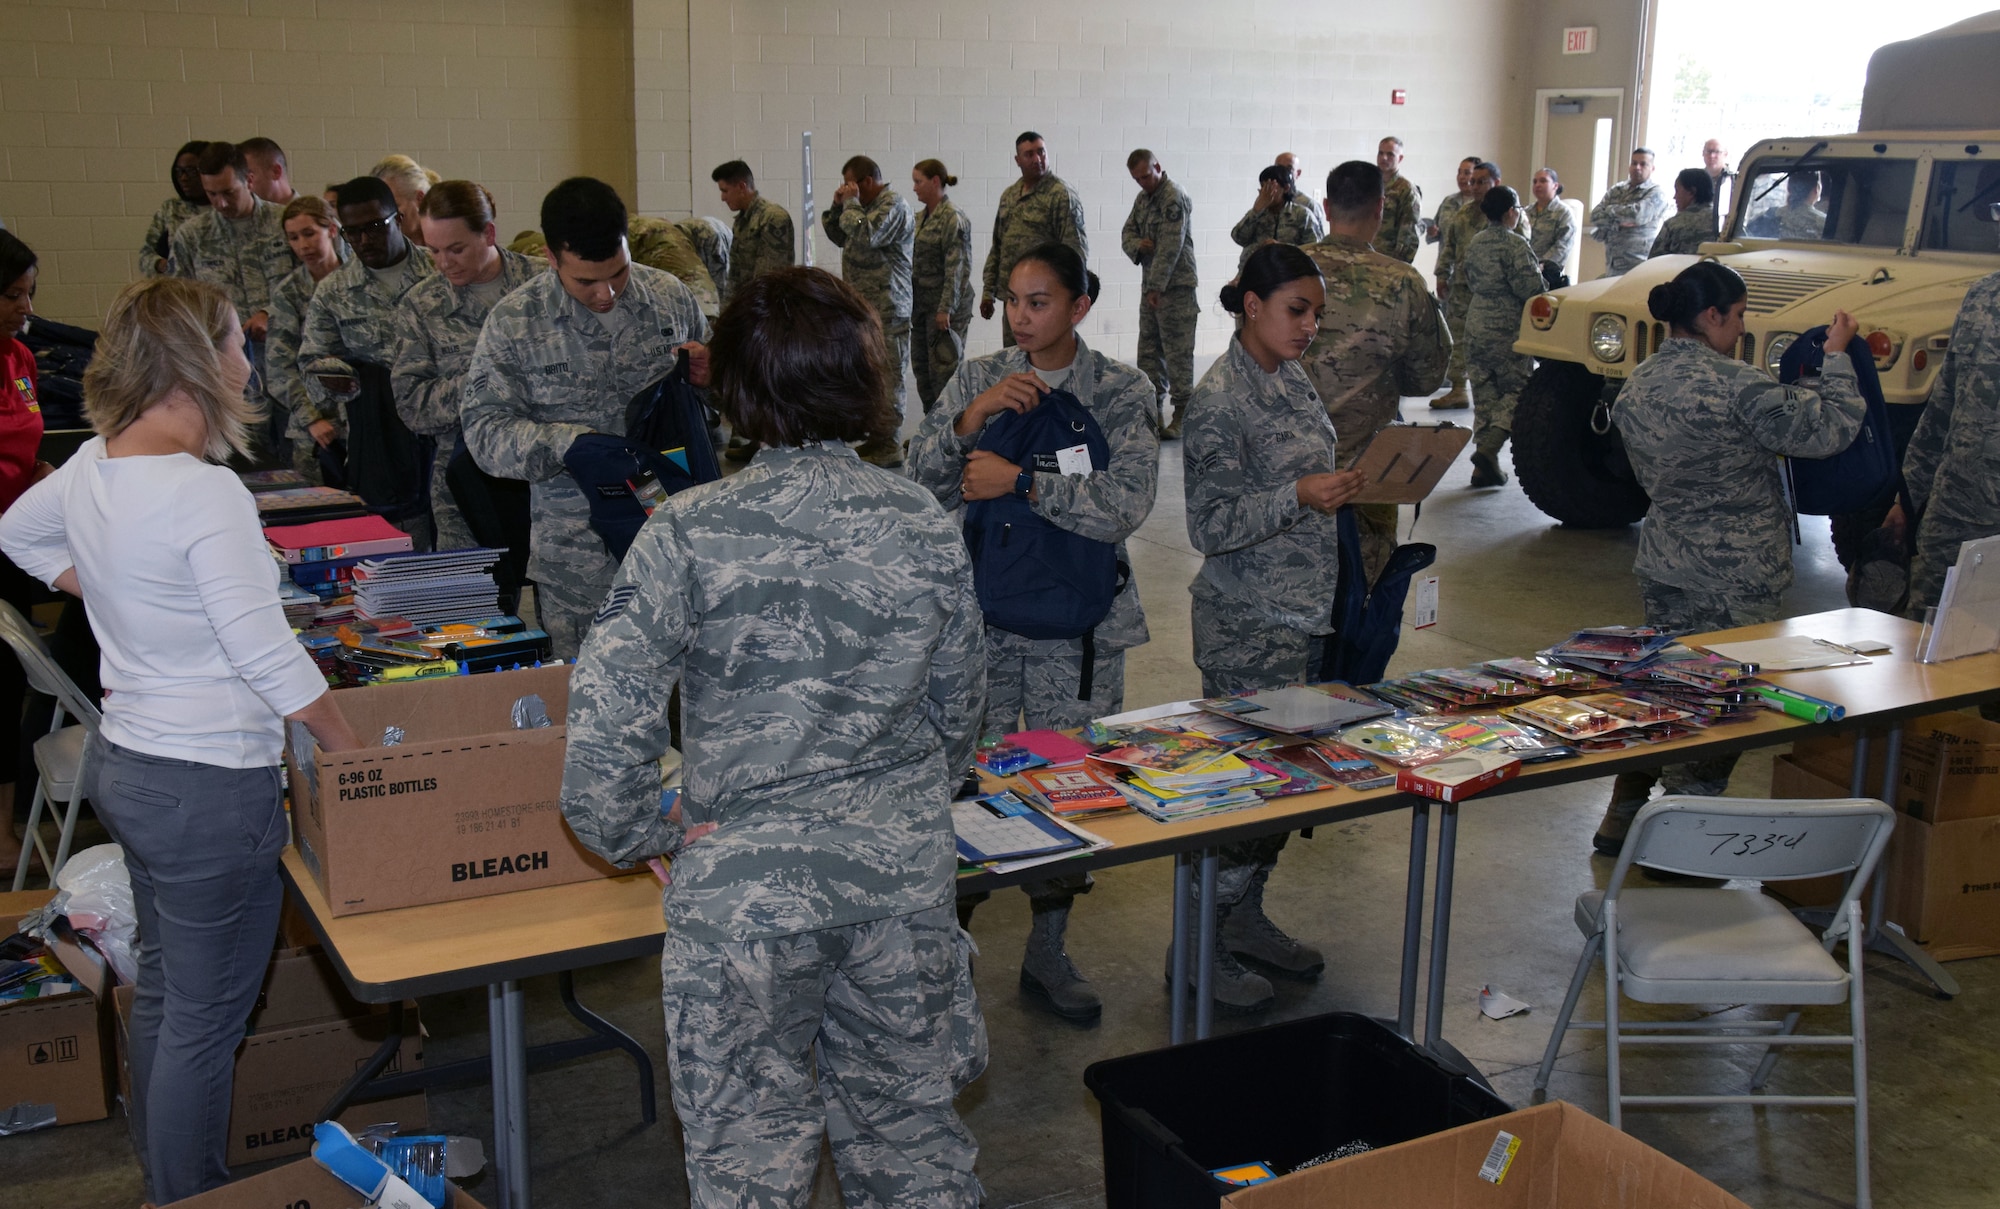 433rd Airlift Wing members pick up school supplies Aug. 4, 2019 at Joint Base San Antonio-Lackland, Texas.